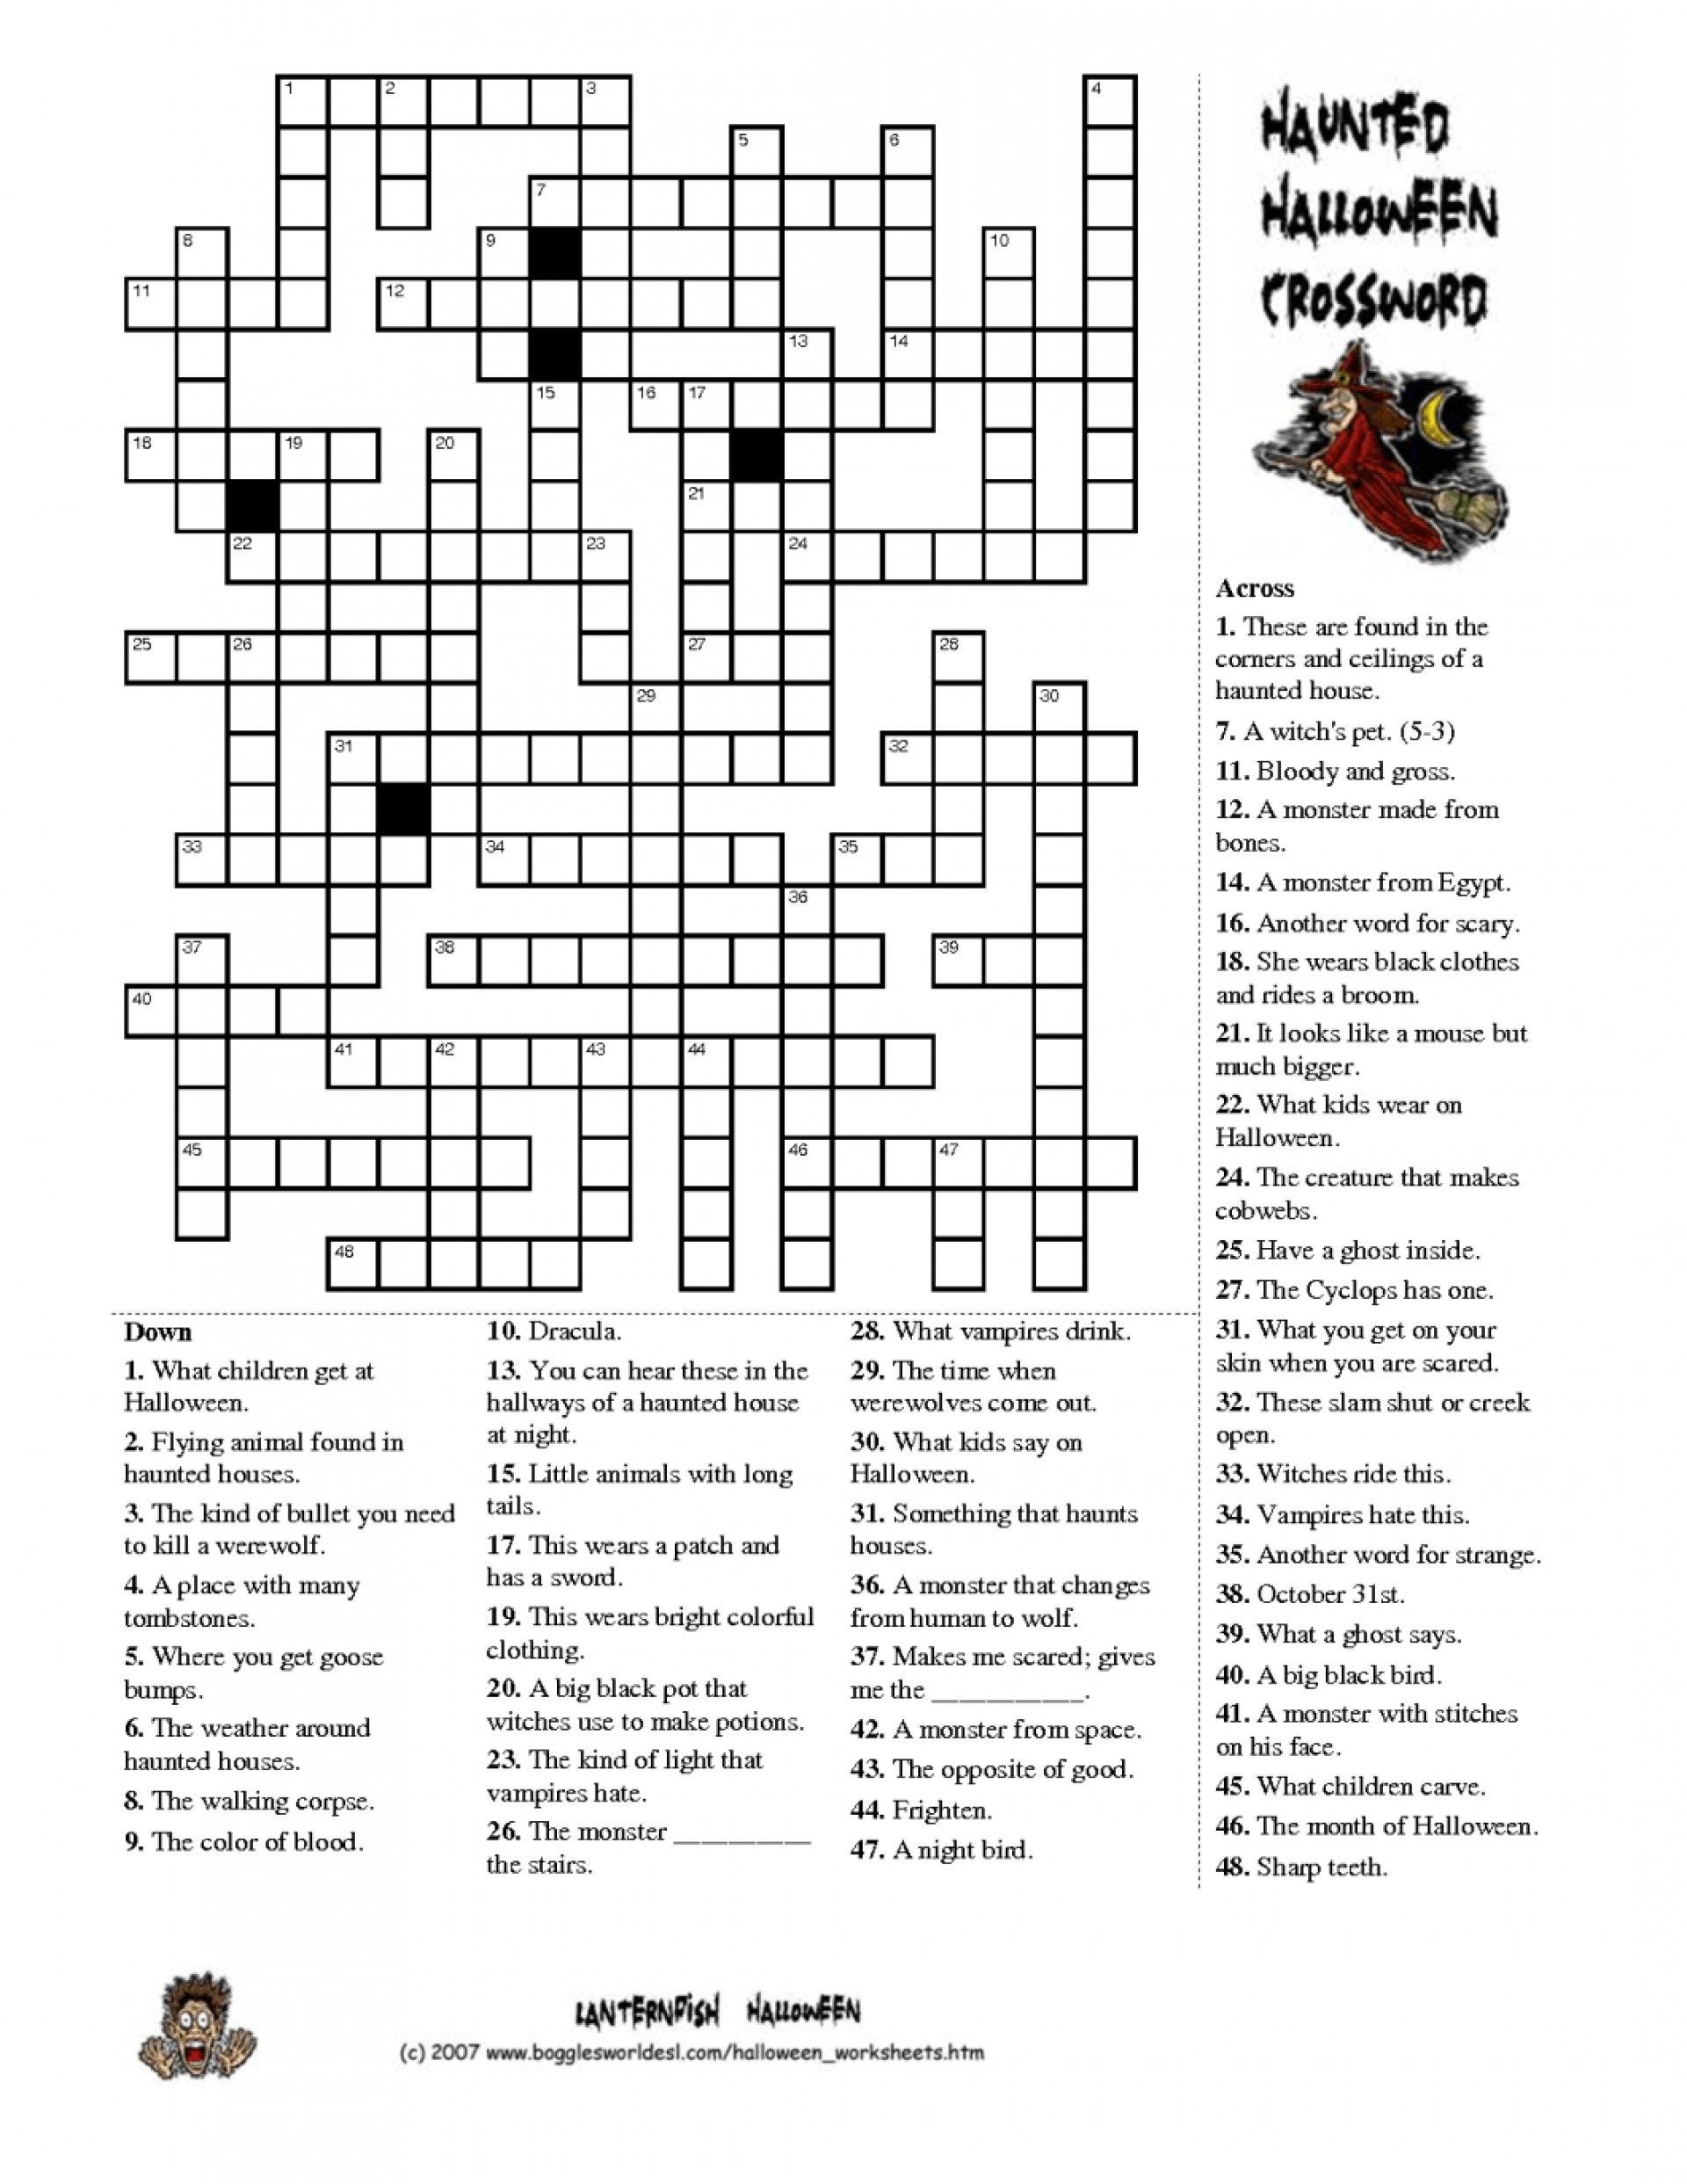 Halloween Crossword Puzzles For Adults